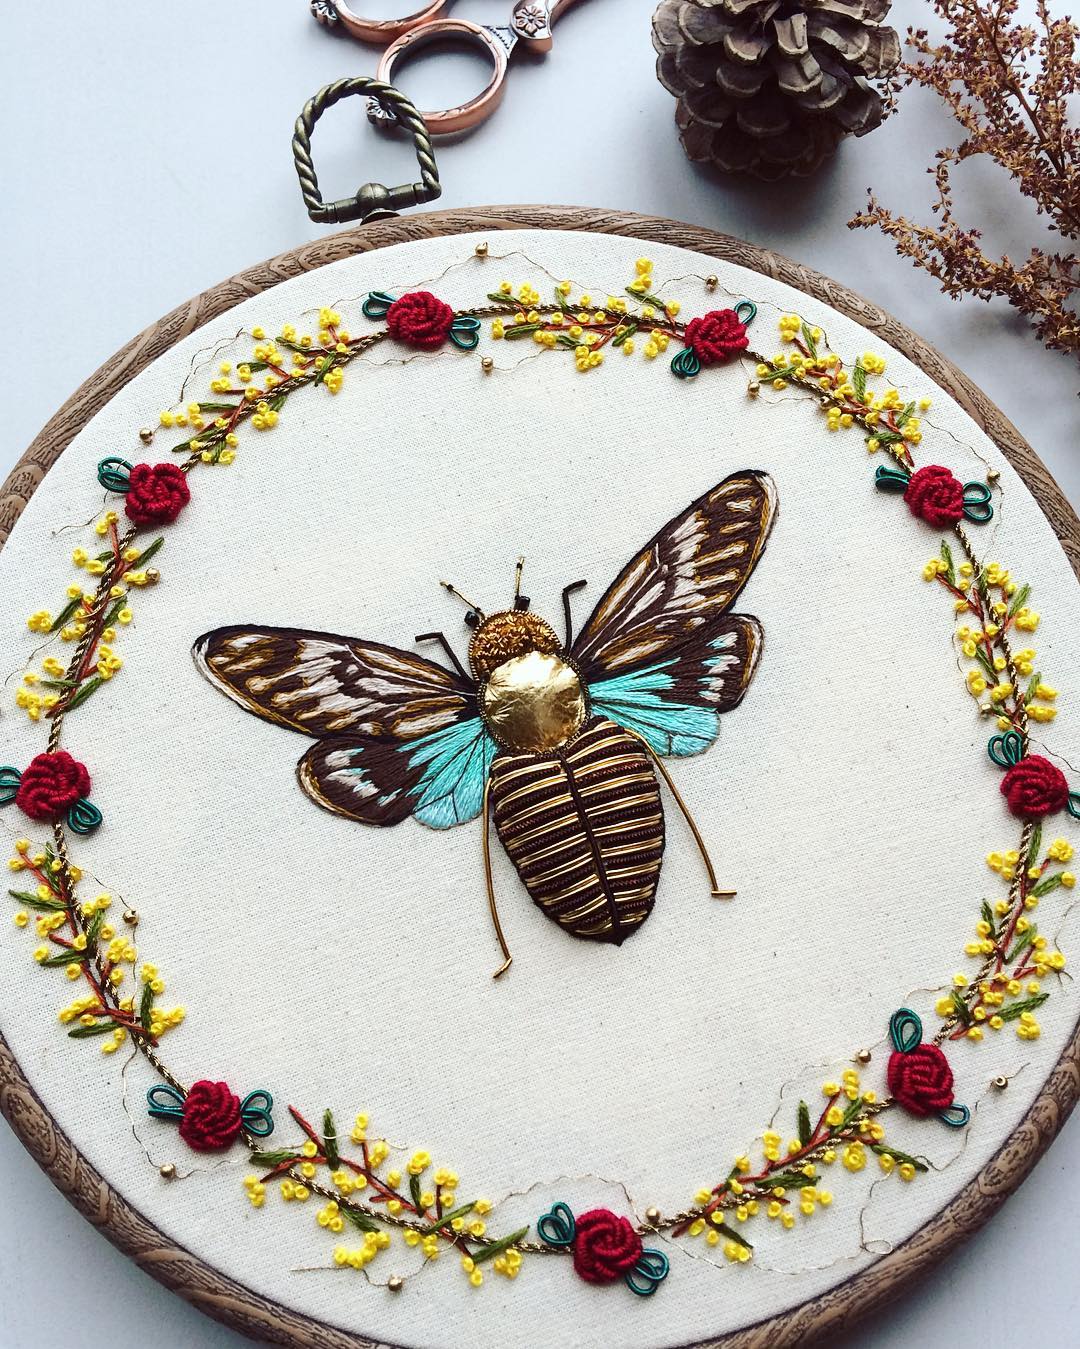 Beautiful Bird And Insect Embroideries Decorated With Metallic Beads By Humayrah Bint Altaf 10